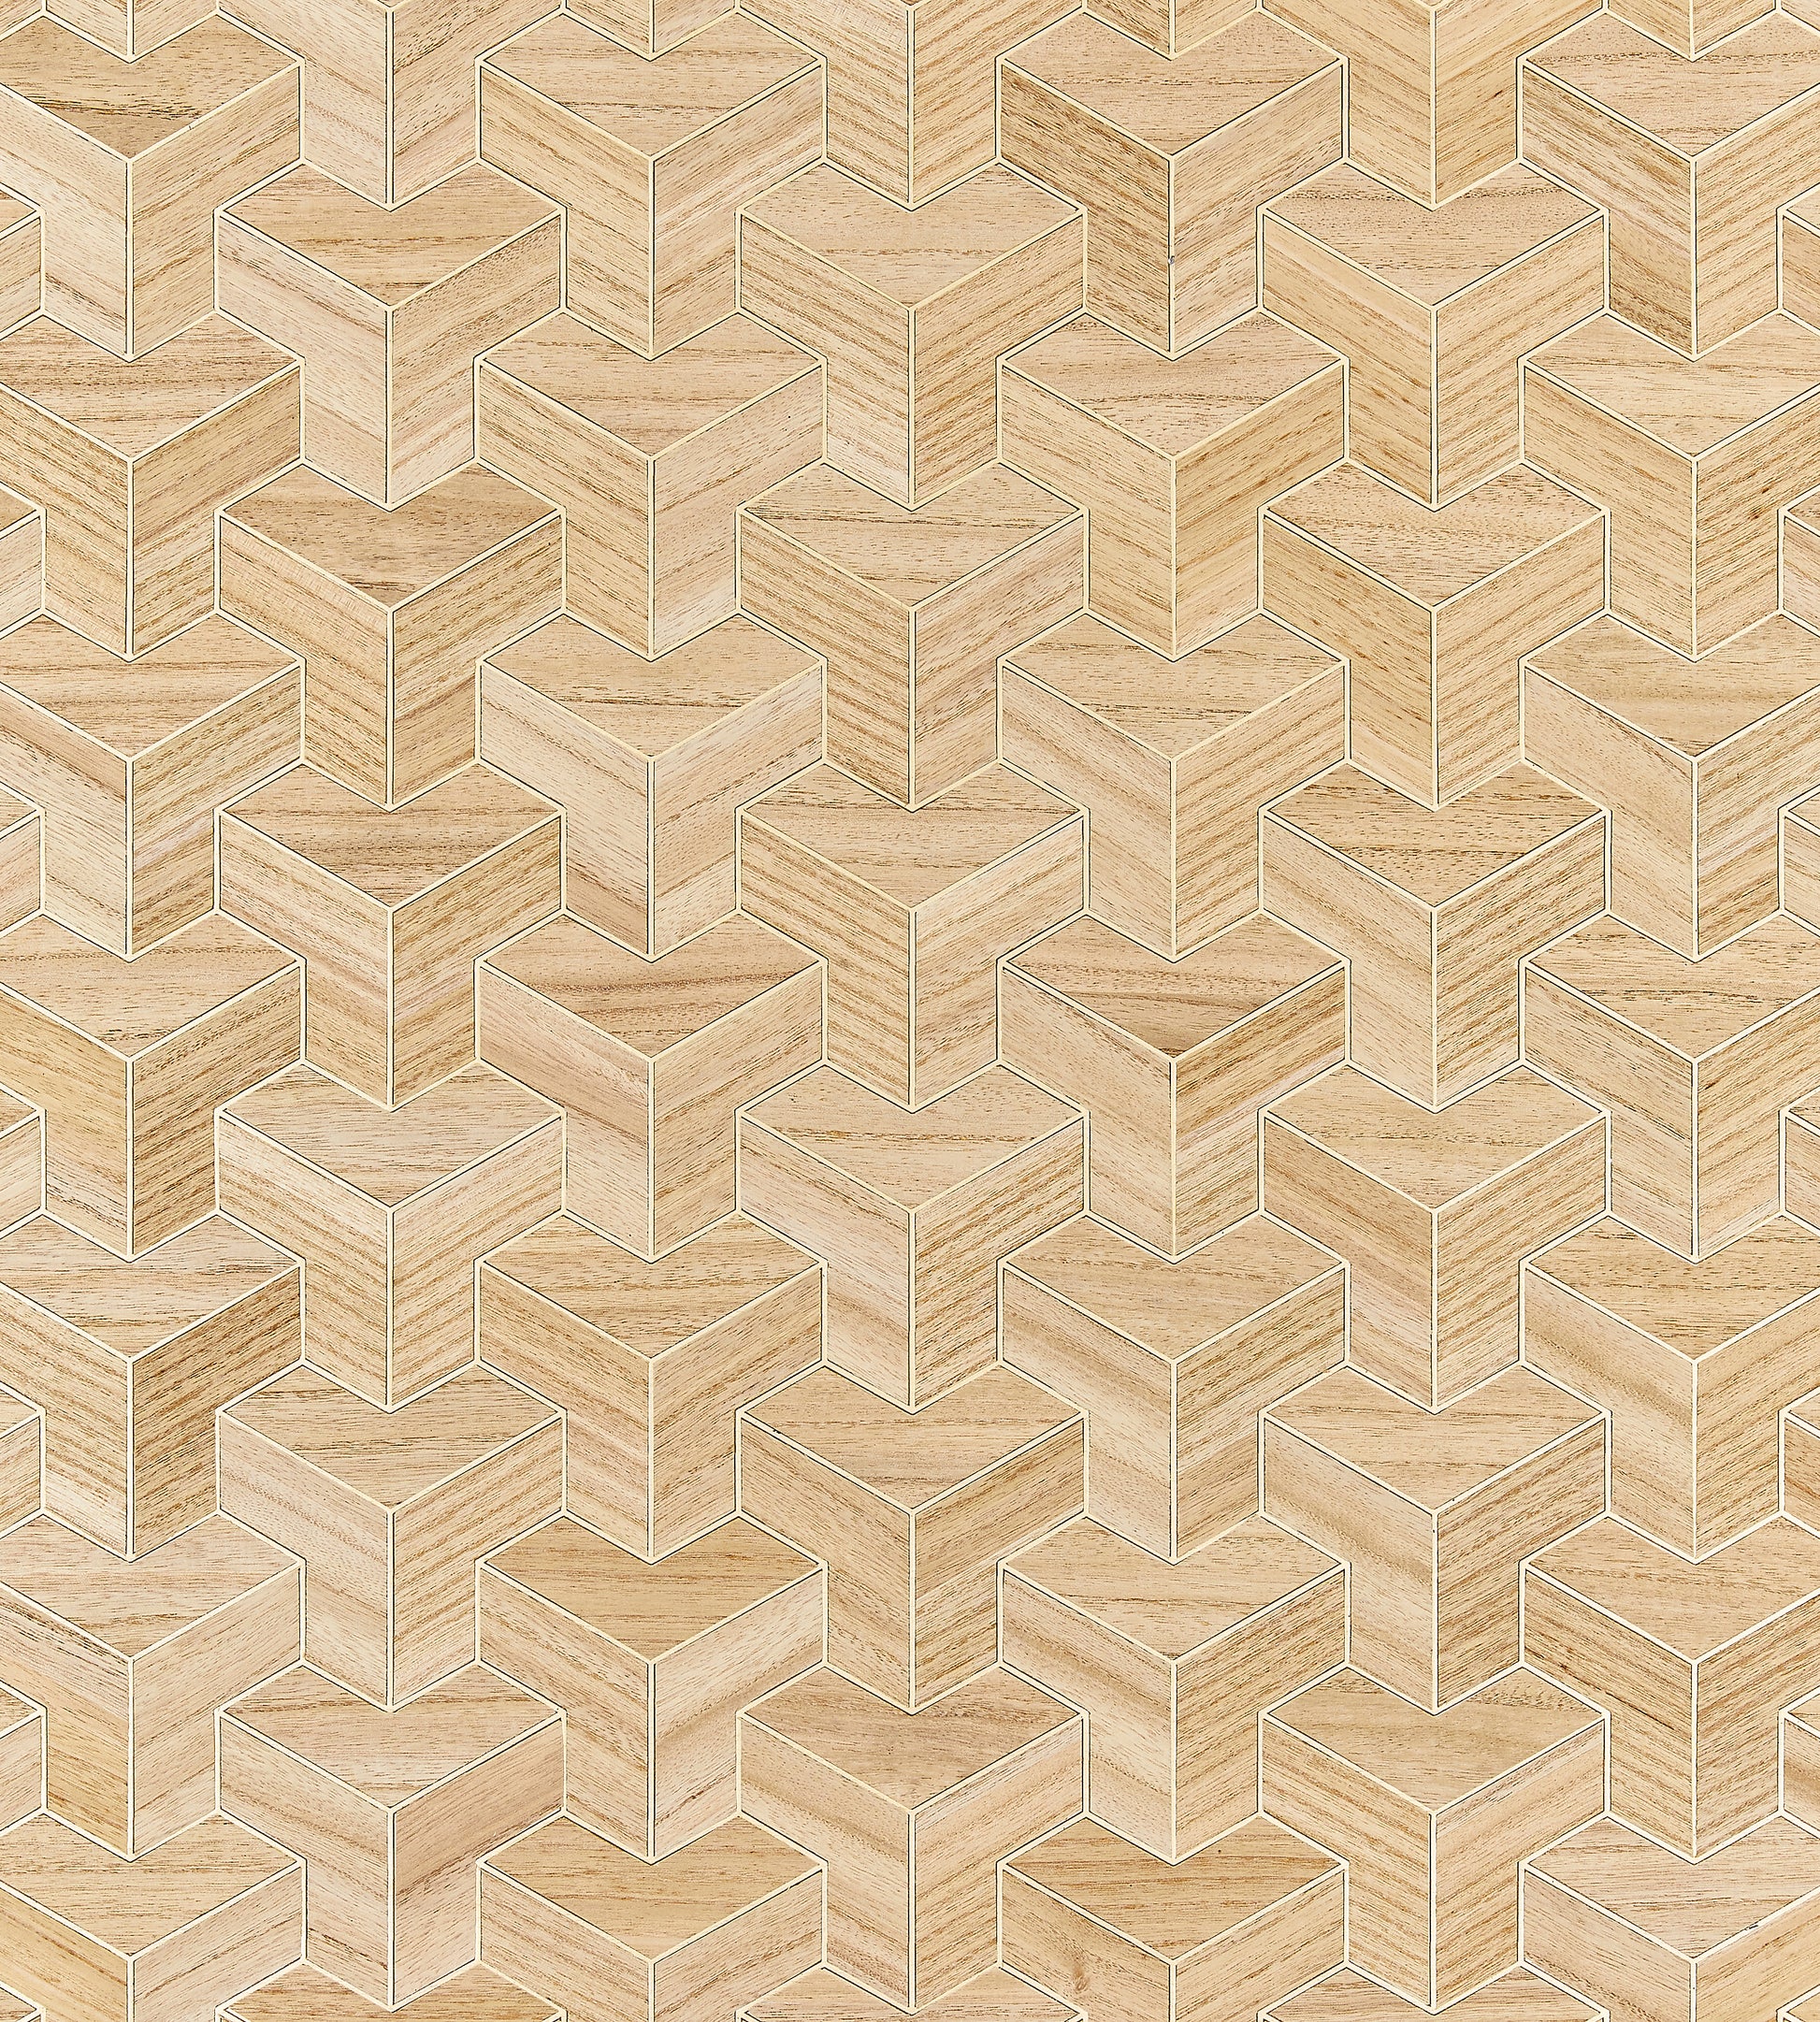 Looking Scalamandre Wallpaper Pattern Sc 0001Wp88472 Name Forte - Wood Antique Geometric|Graphic Wallpaper